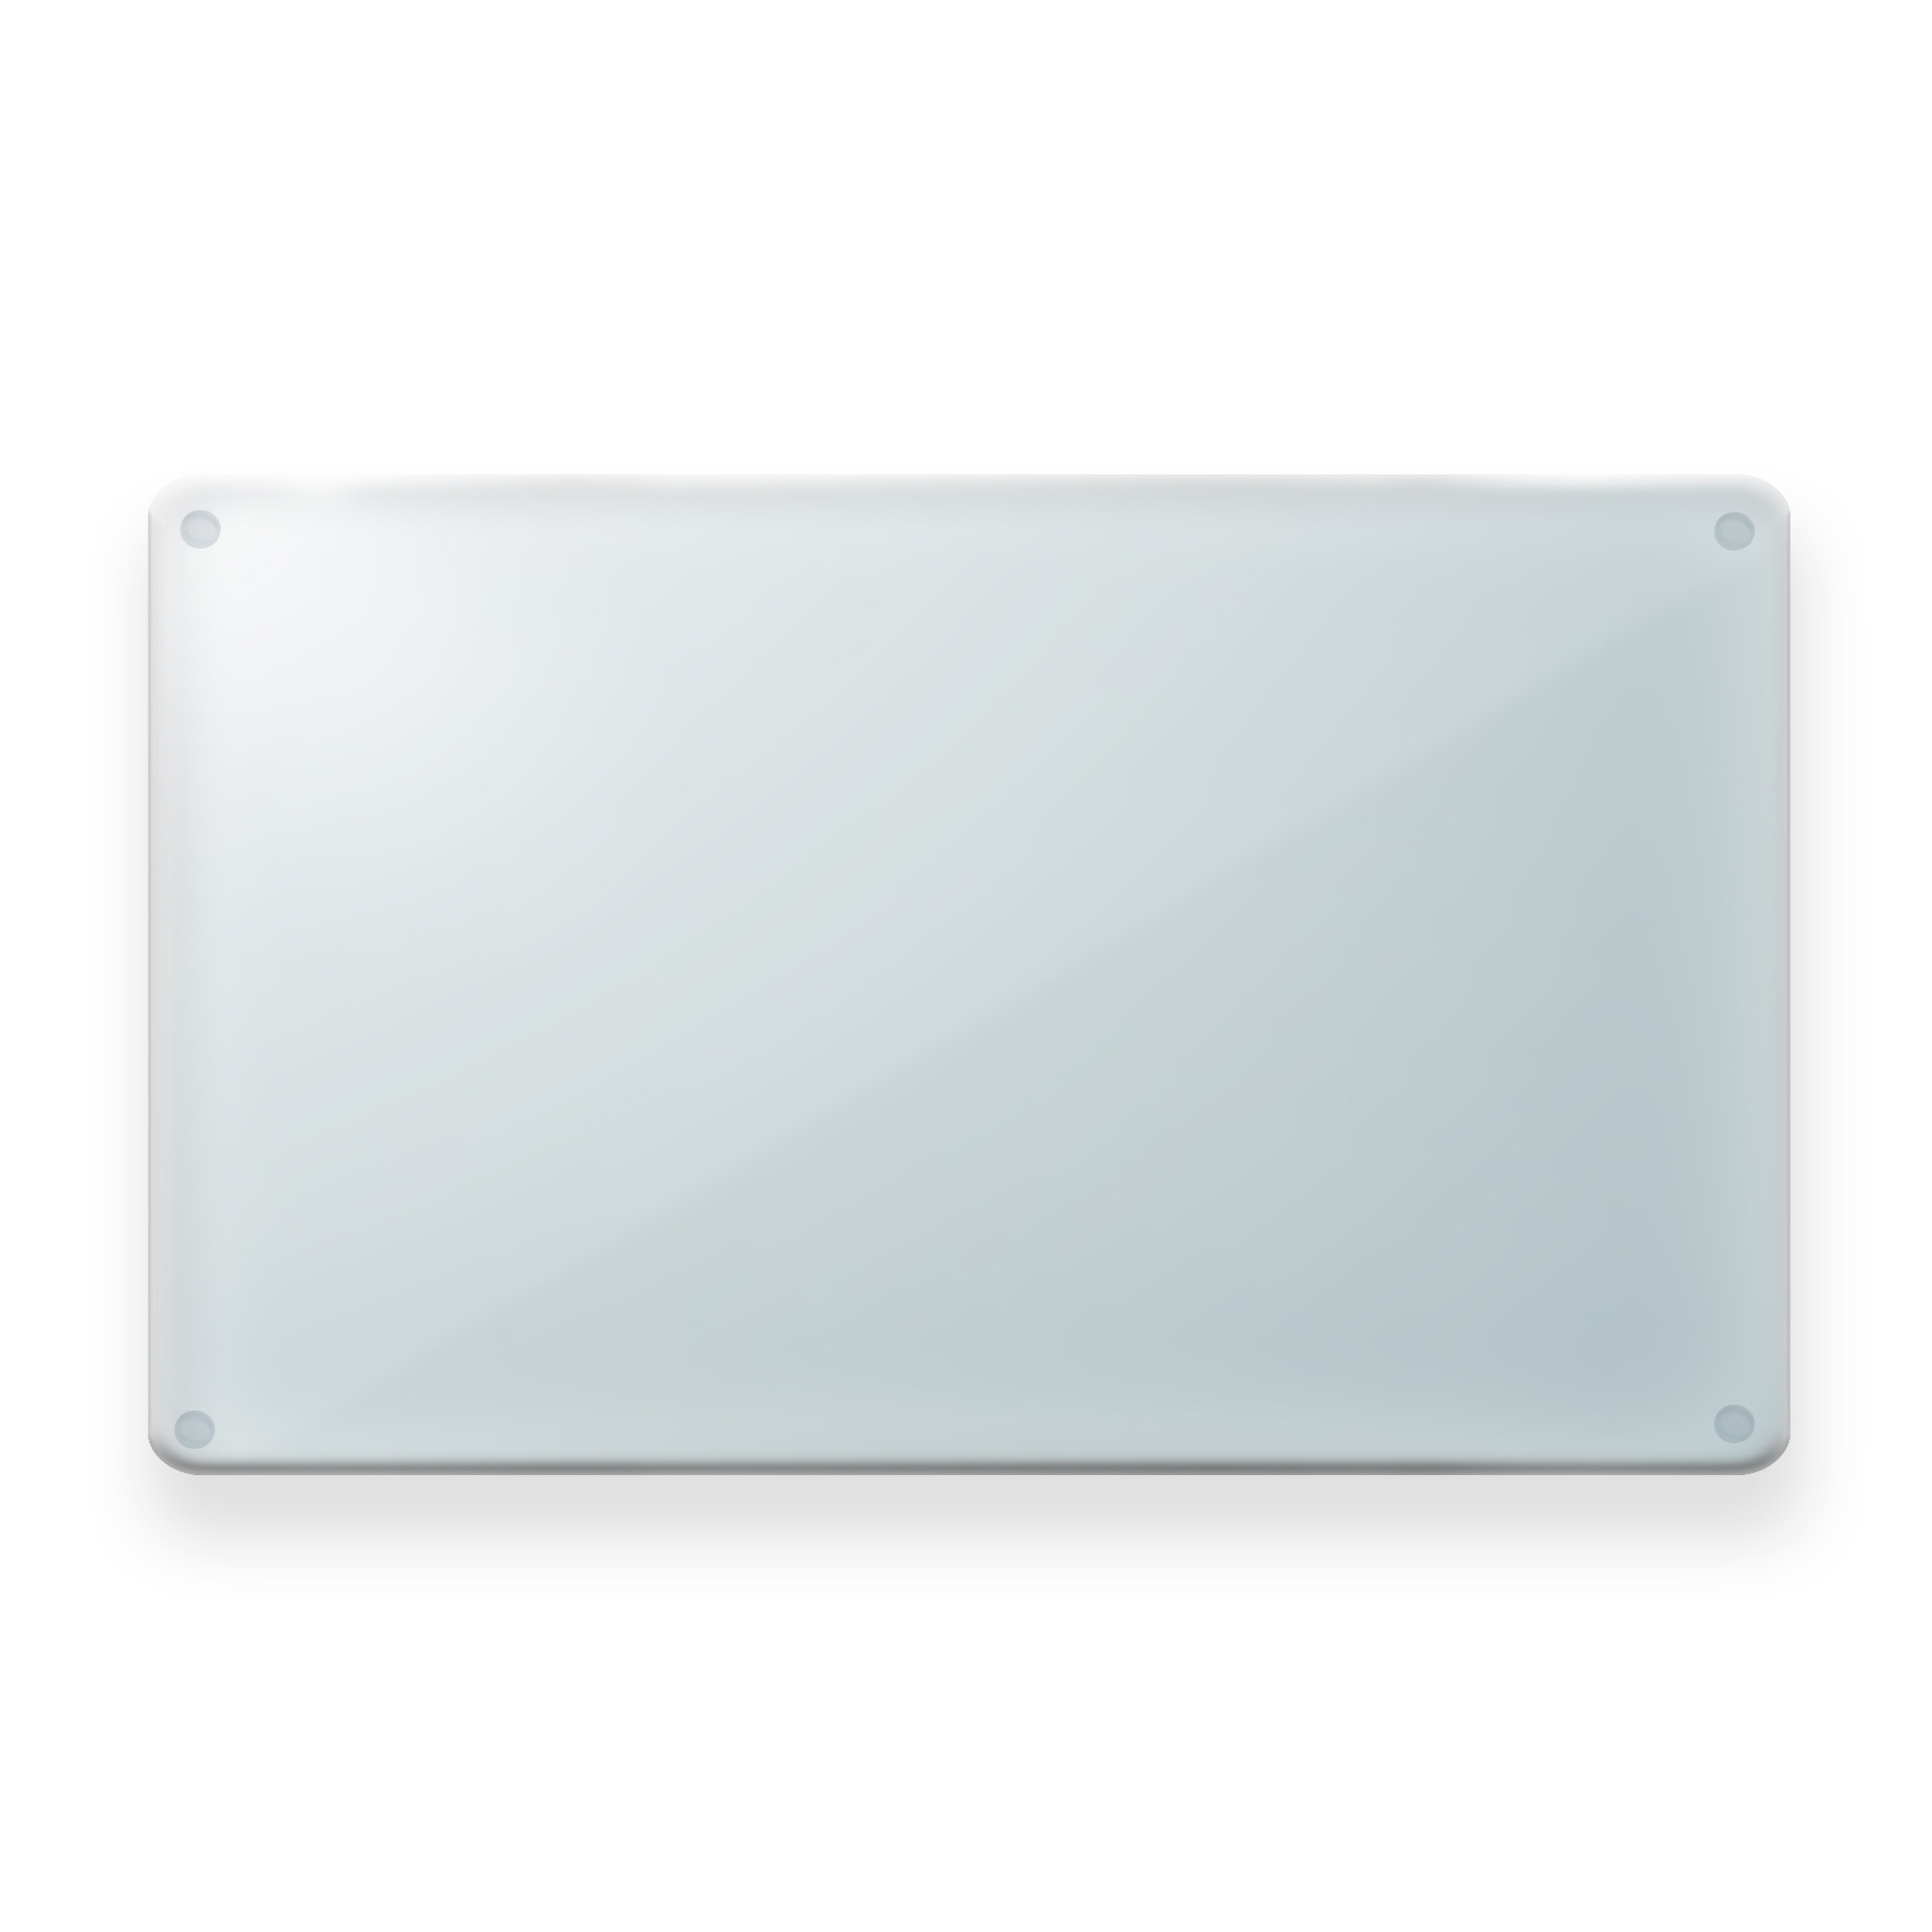 Pebbly - Multifunctional Glass Protection Board 40 x 30 cm - Transparent